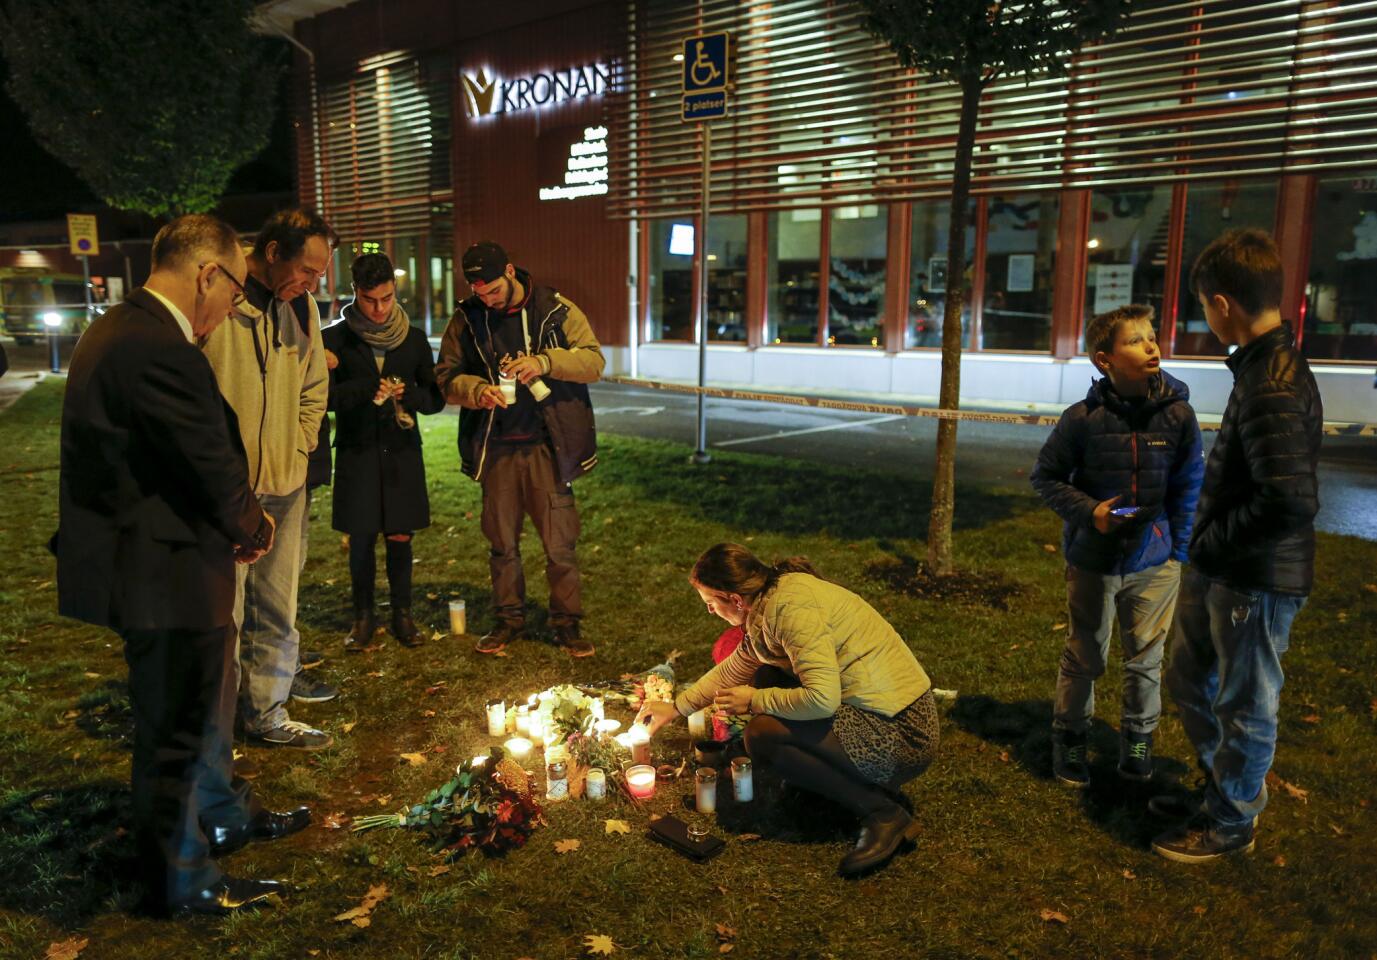 People light candles and lay flower tributes outside the school where a masked man stabbed four people Oct. 22, 2015, in Trollhattan, Sweden.